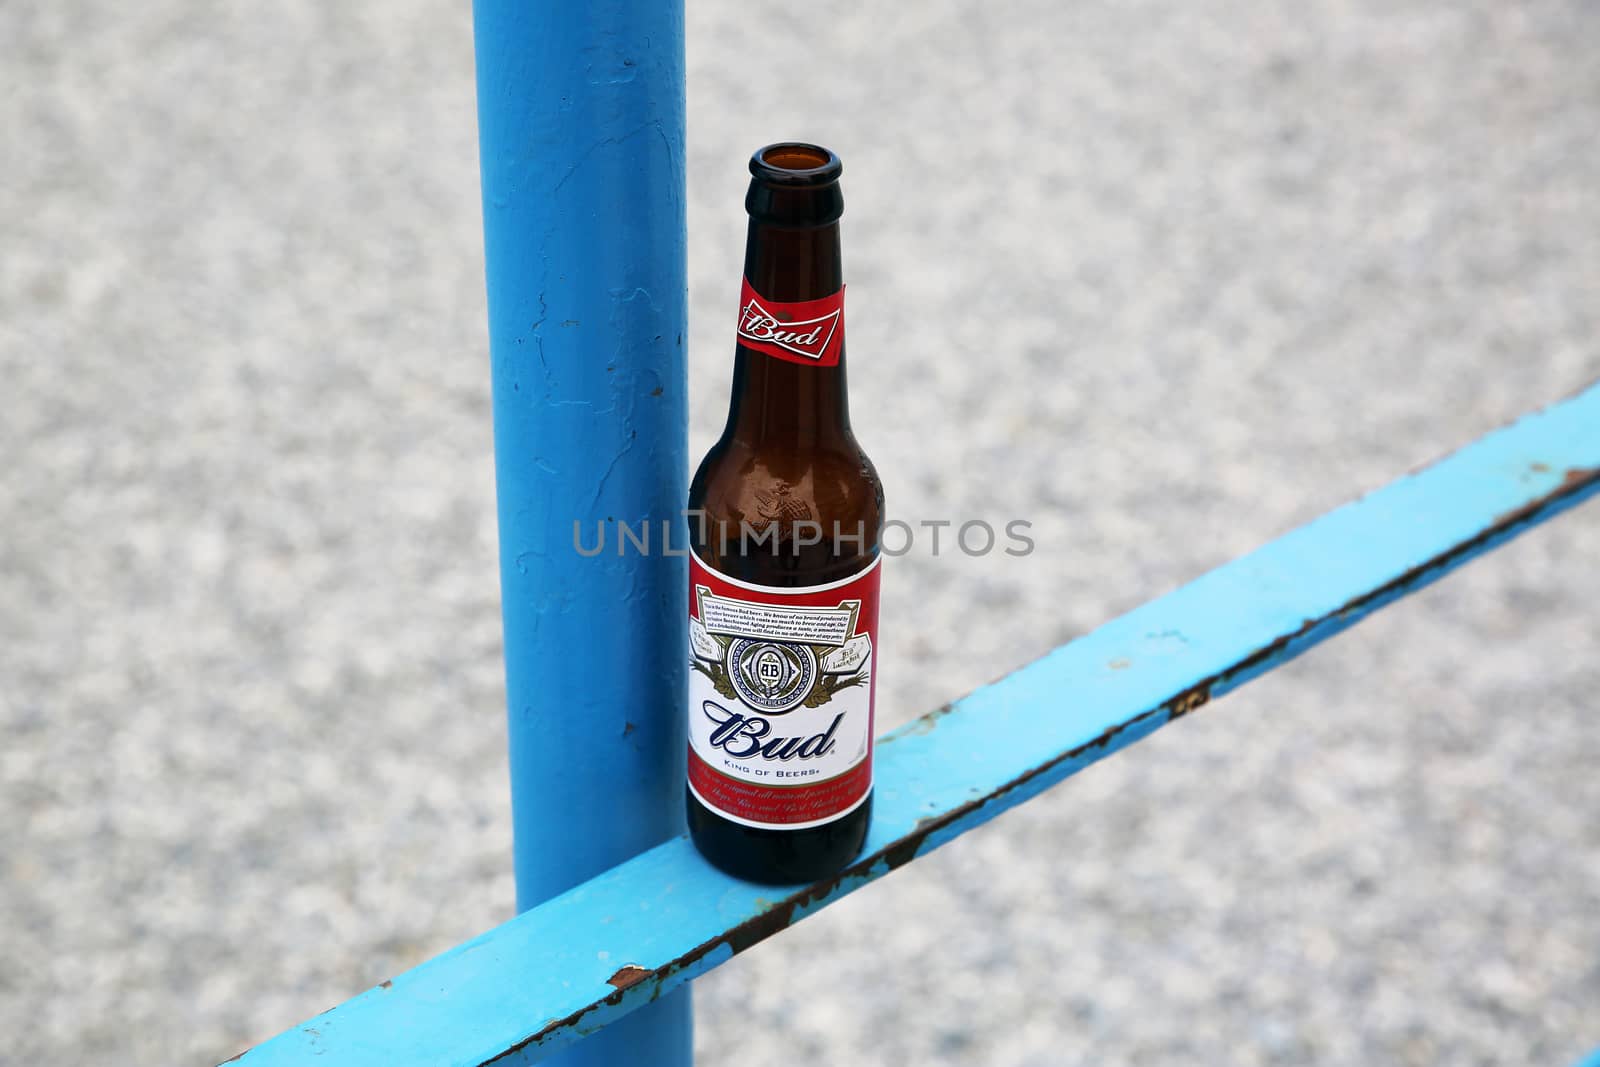 Menton, France - May 14, 2016: Bottle of Budweiser Beer on a Blue Metal Fence, Beach in the Background